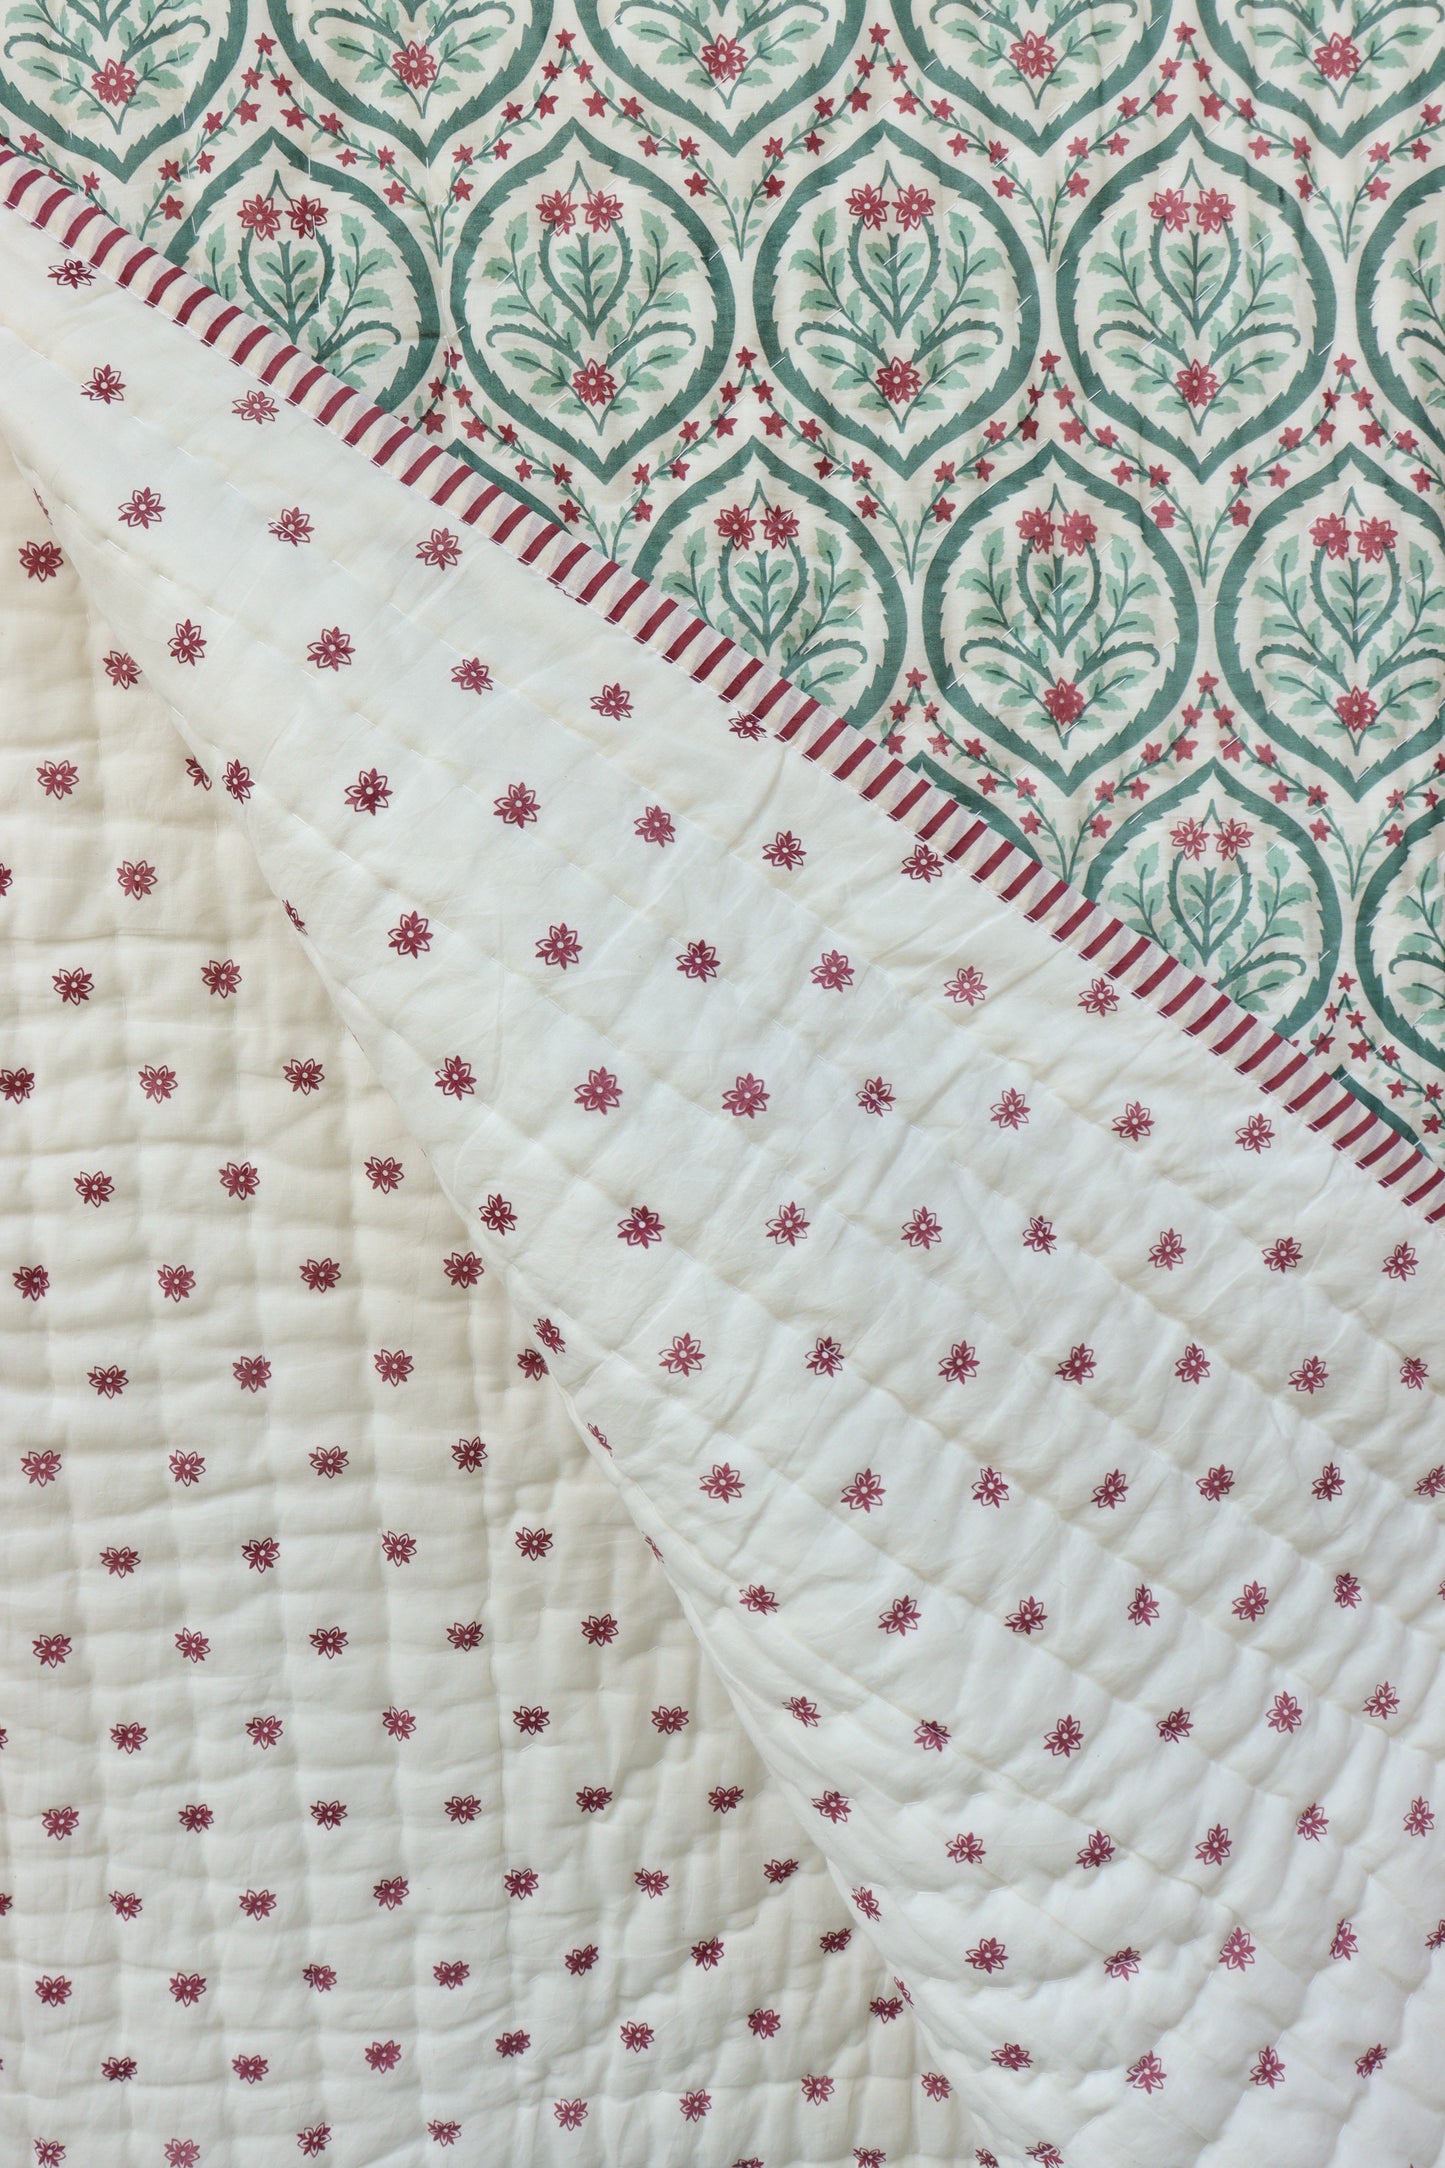 Mughal Jaal Reversible Cotton Quilt